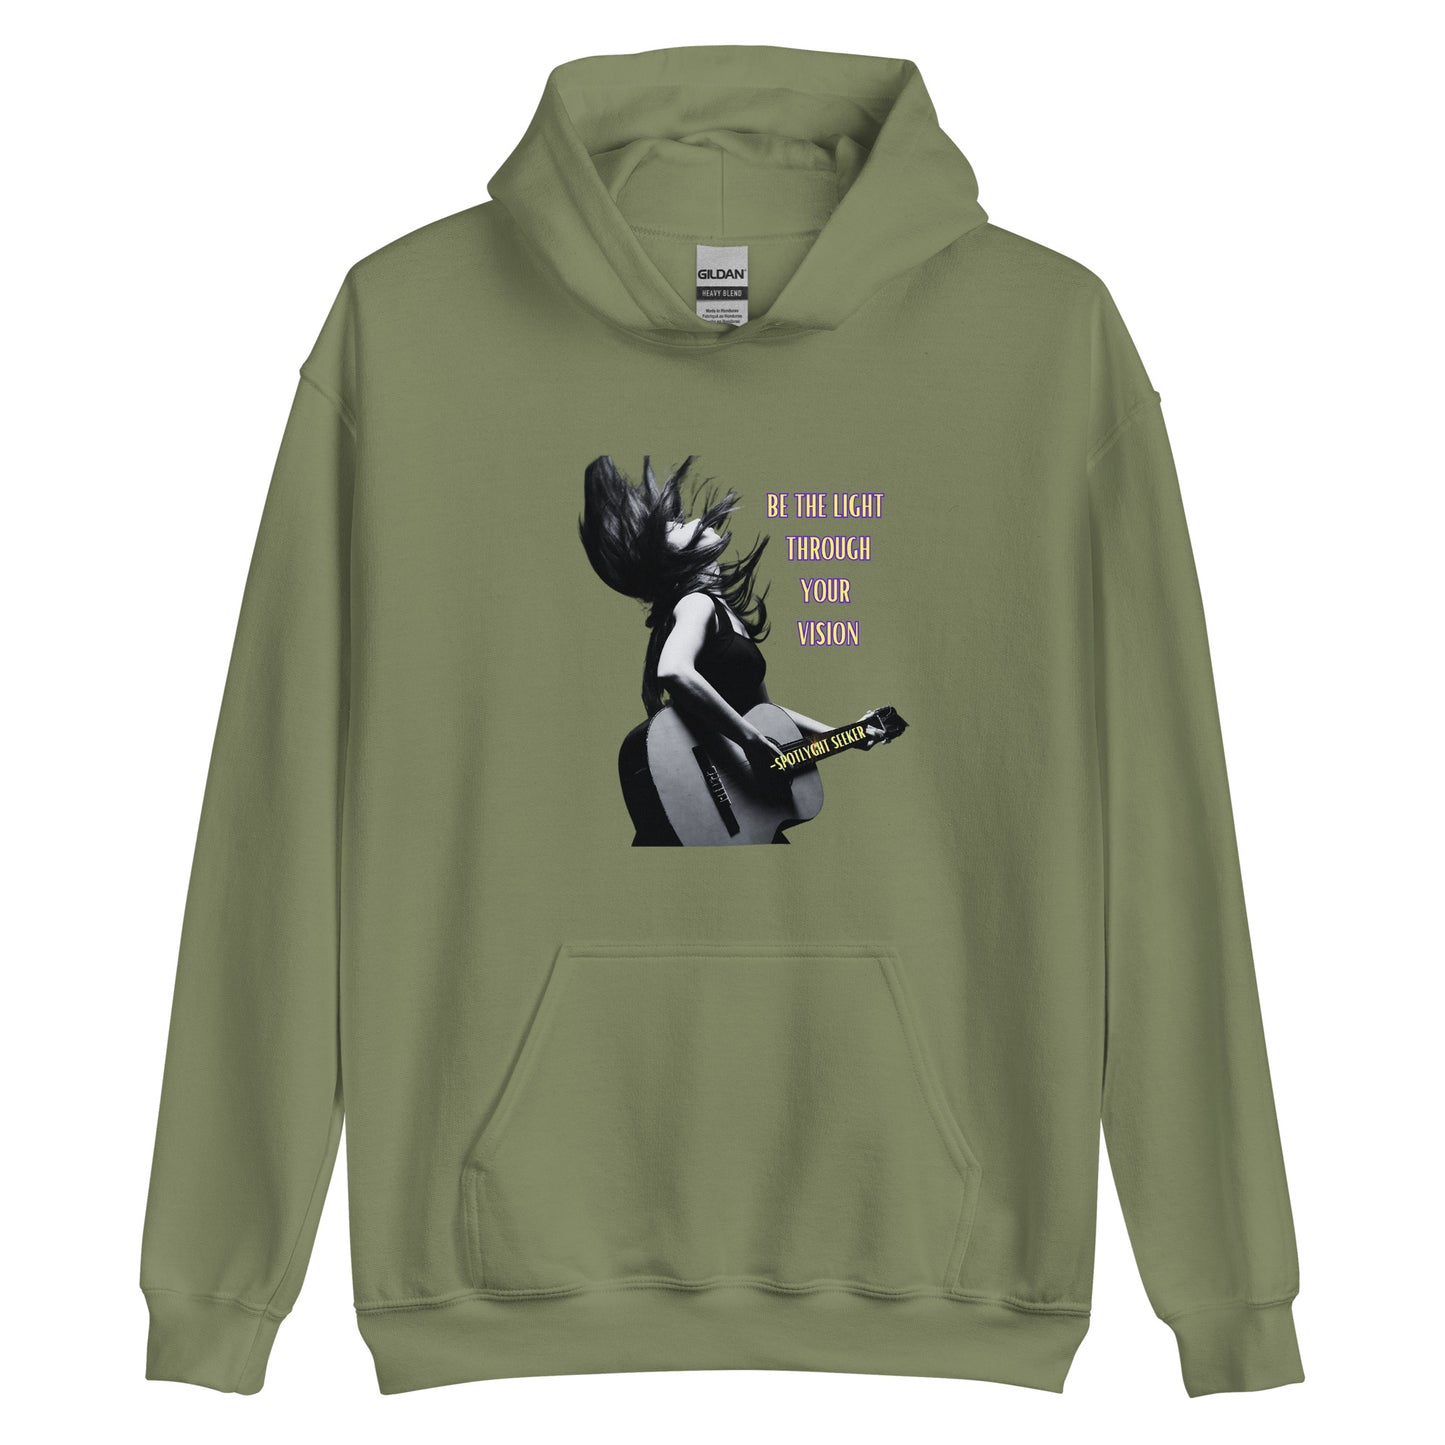 A stylish black and white Heavyweight Be the Light Unisex Hoodie displayed against a backdrop of creativity. The bold graphics symbolize authenticity, inviting artists to embrace their vision and be the light for their audience.